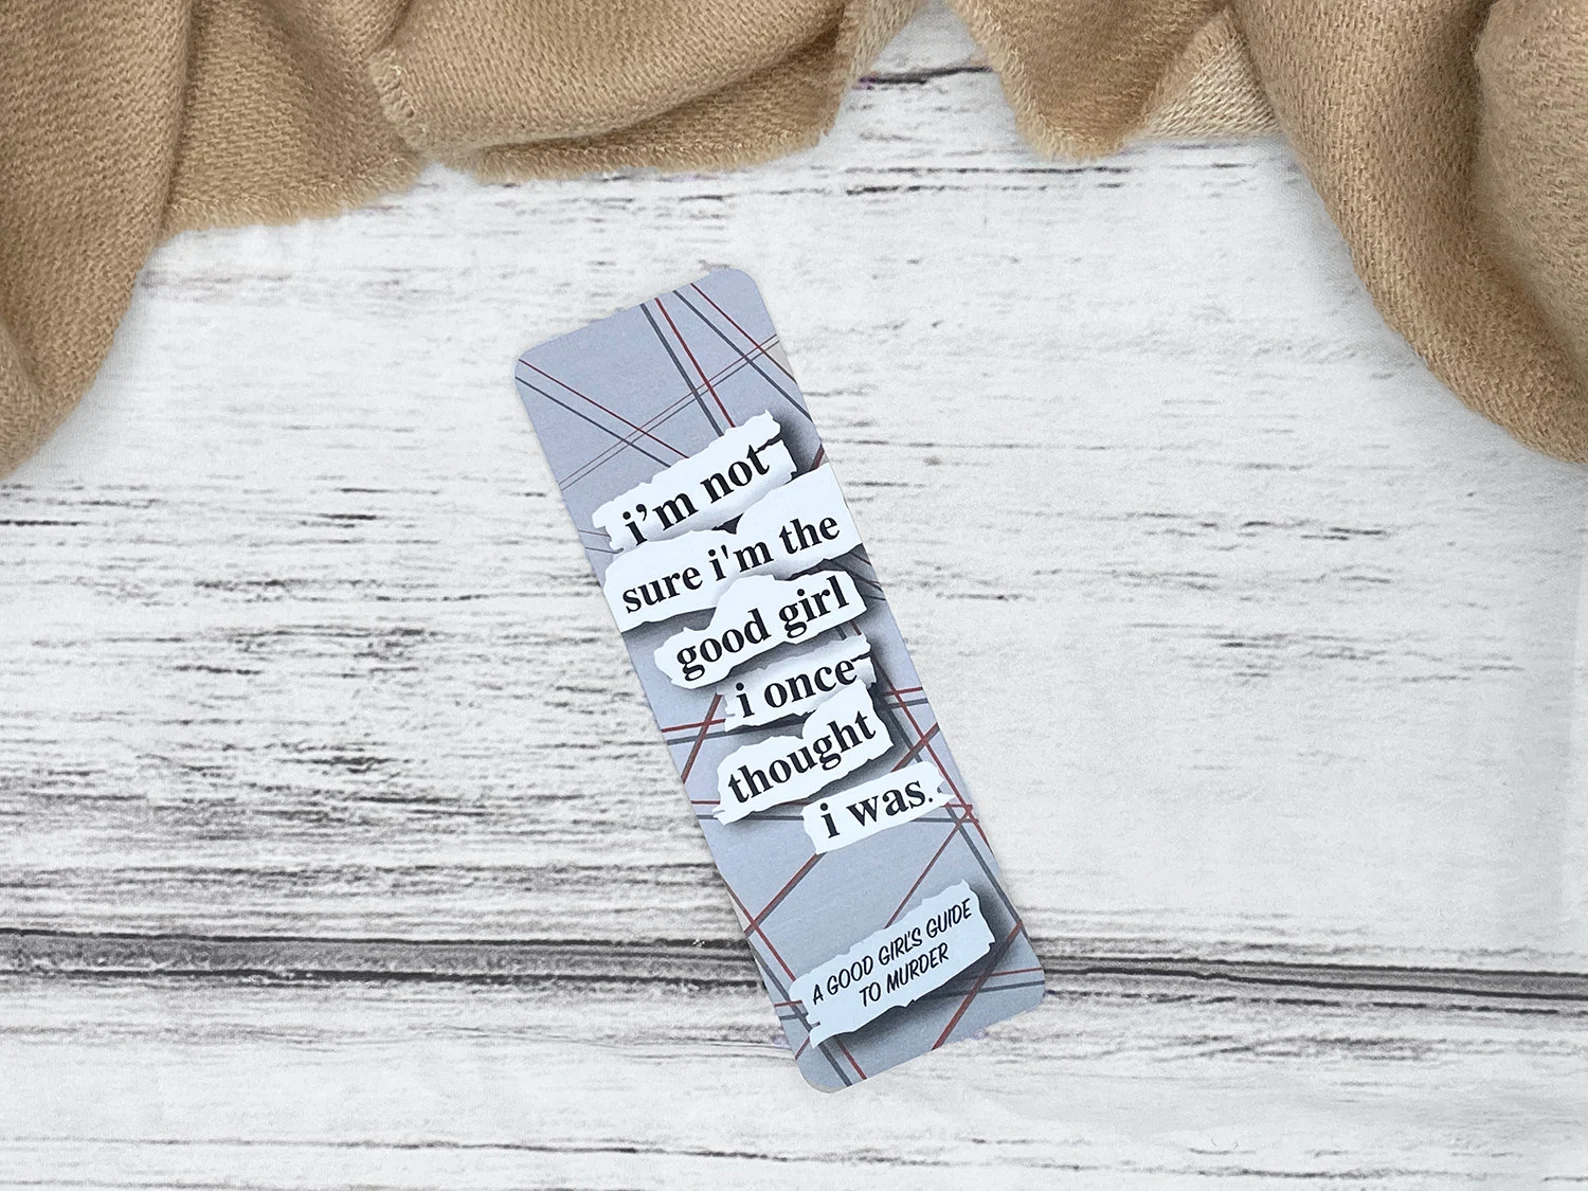 A bookmark that reads "I'm not sure I'm the good girl I once thought I was"